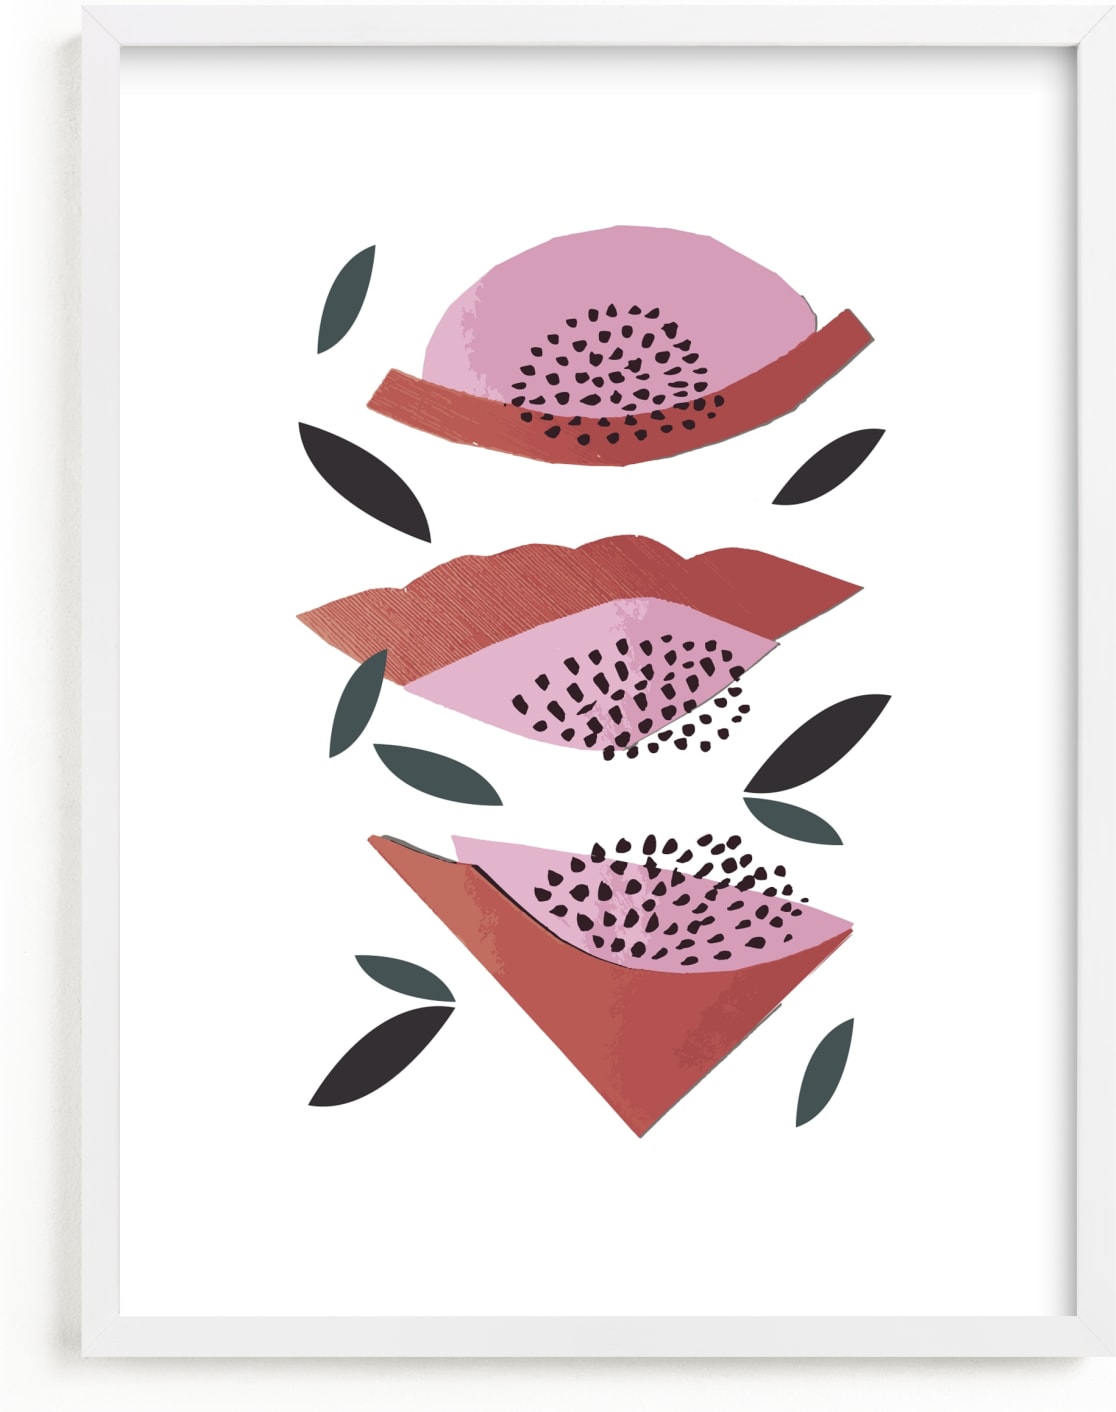 This is a rosegold kids wall art by Jenna Skead called Honey Melon.